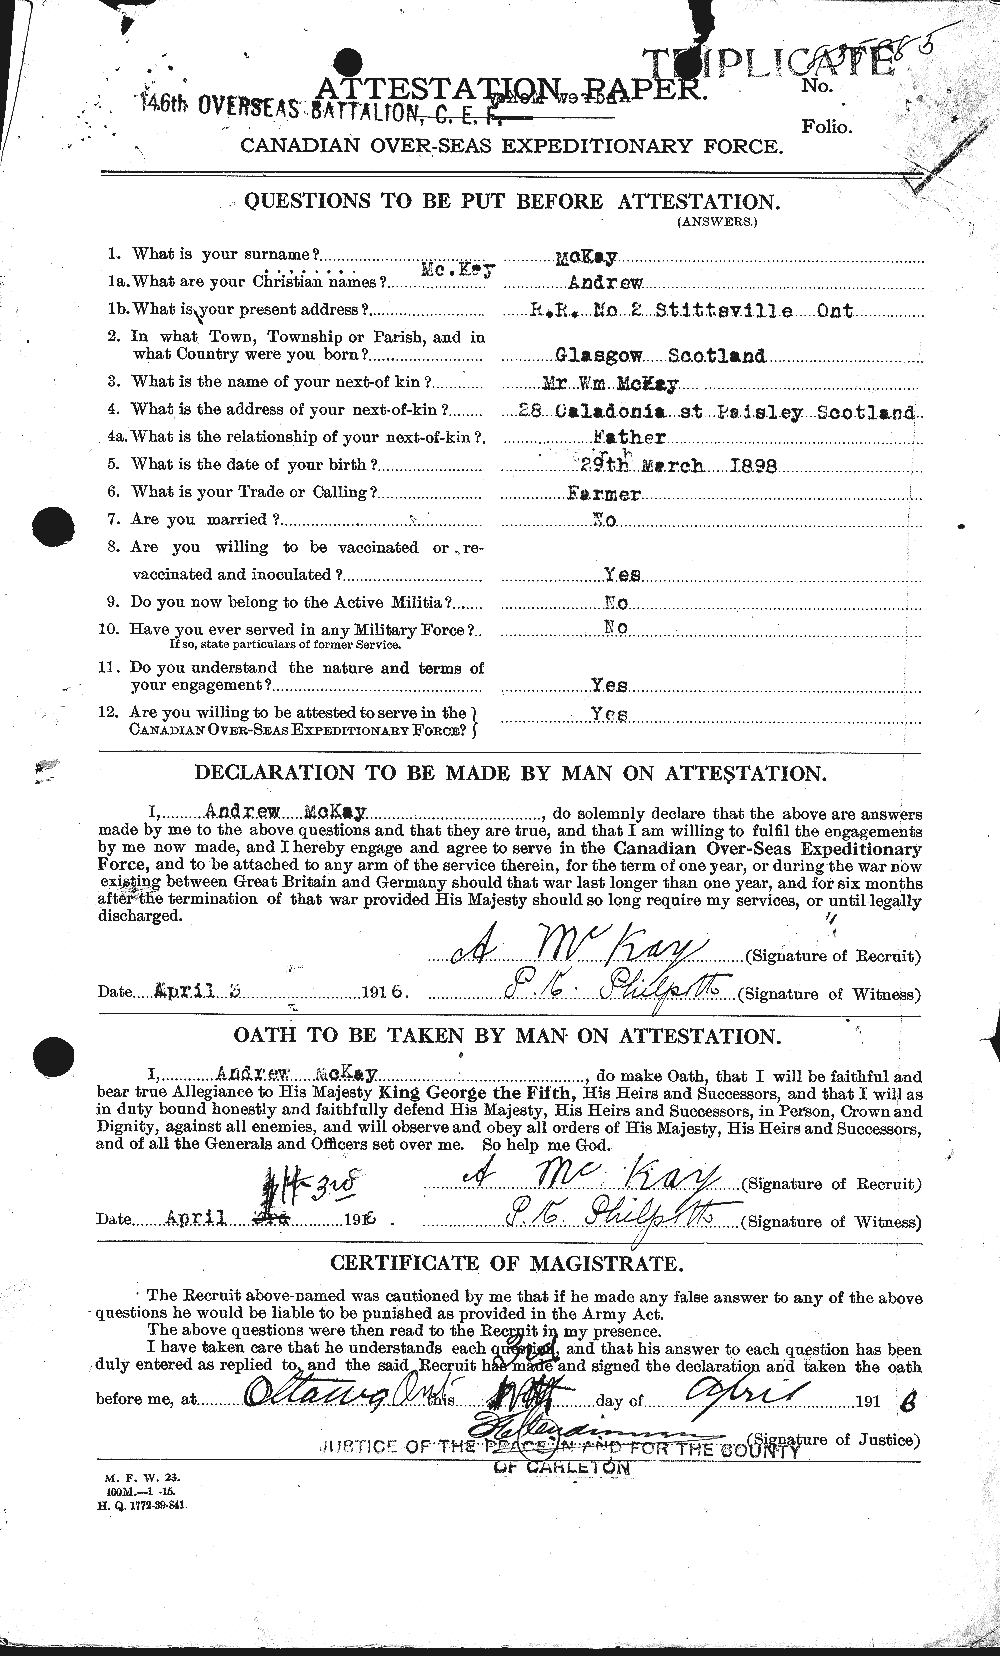 Personnel Records of the First World War - CEF 530971a